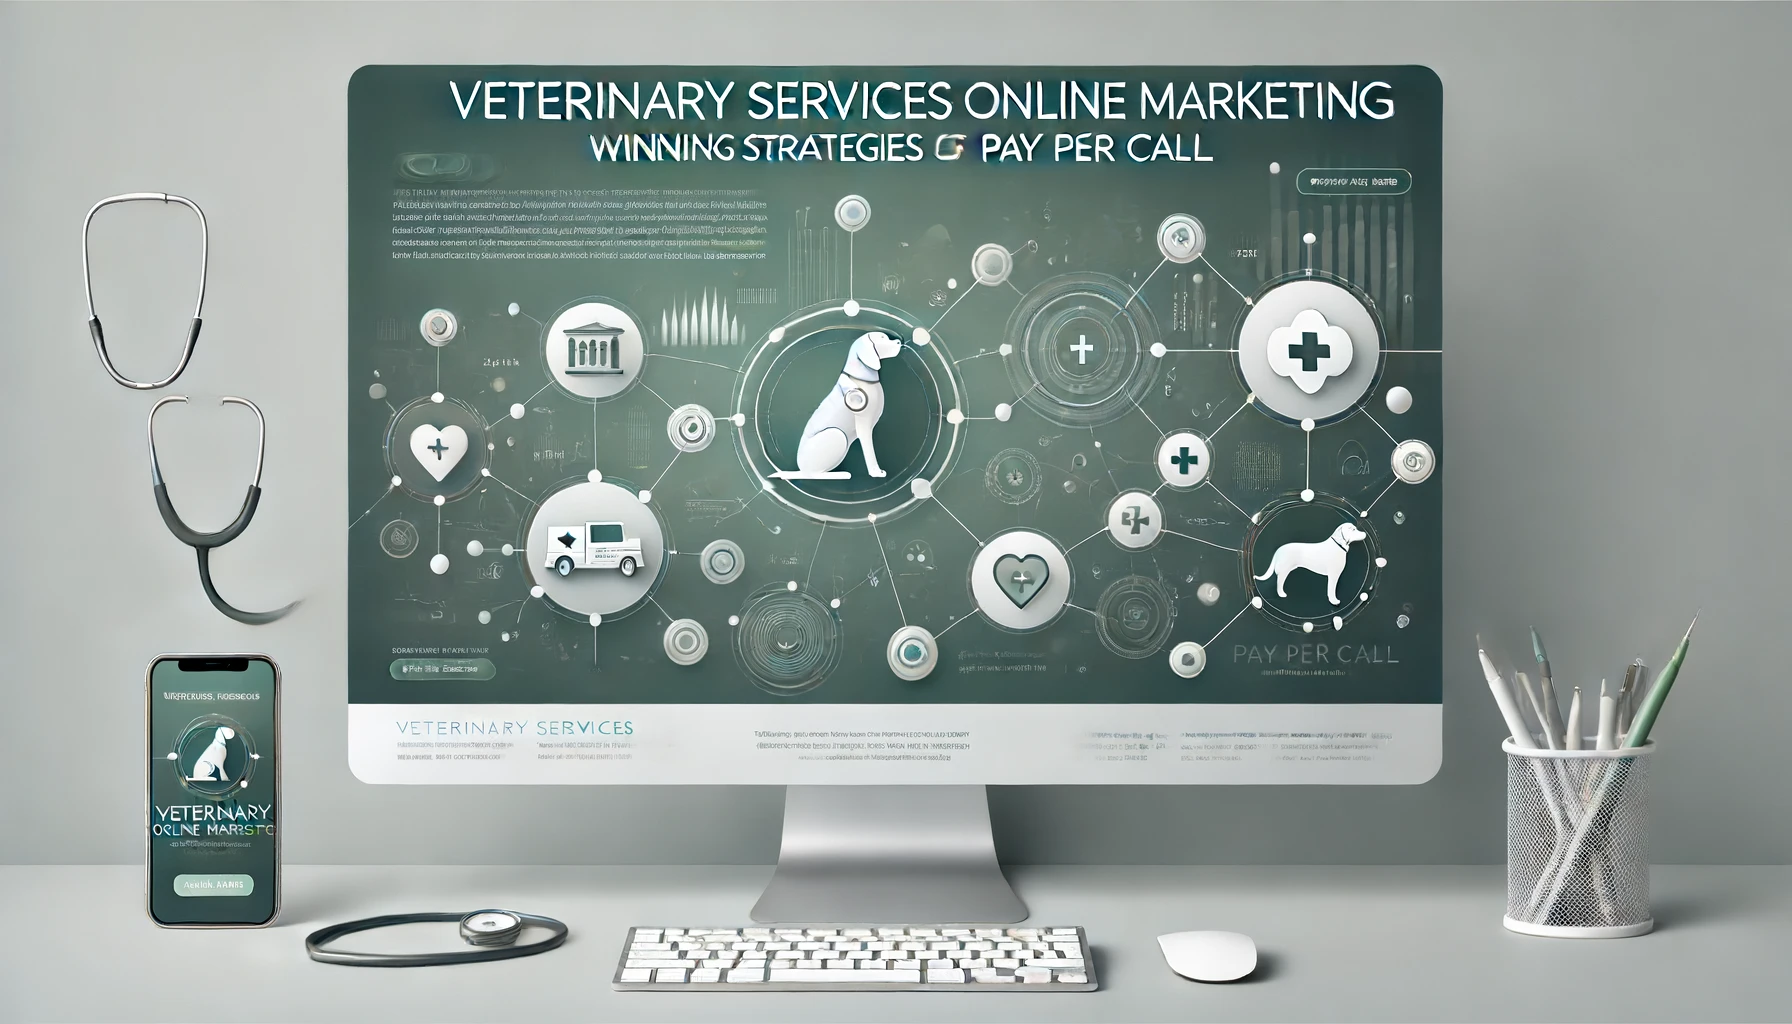 Veterinary Services Online Marketing: Winning Strategies for Pay Per Call